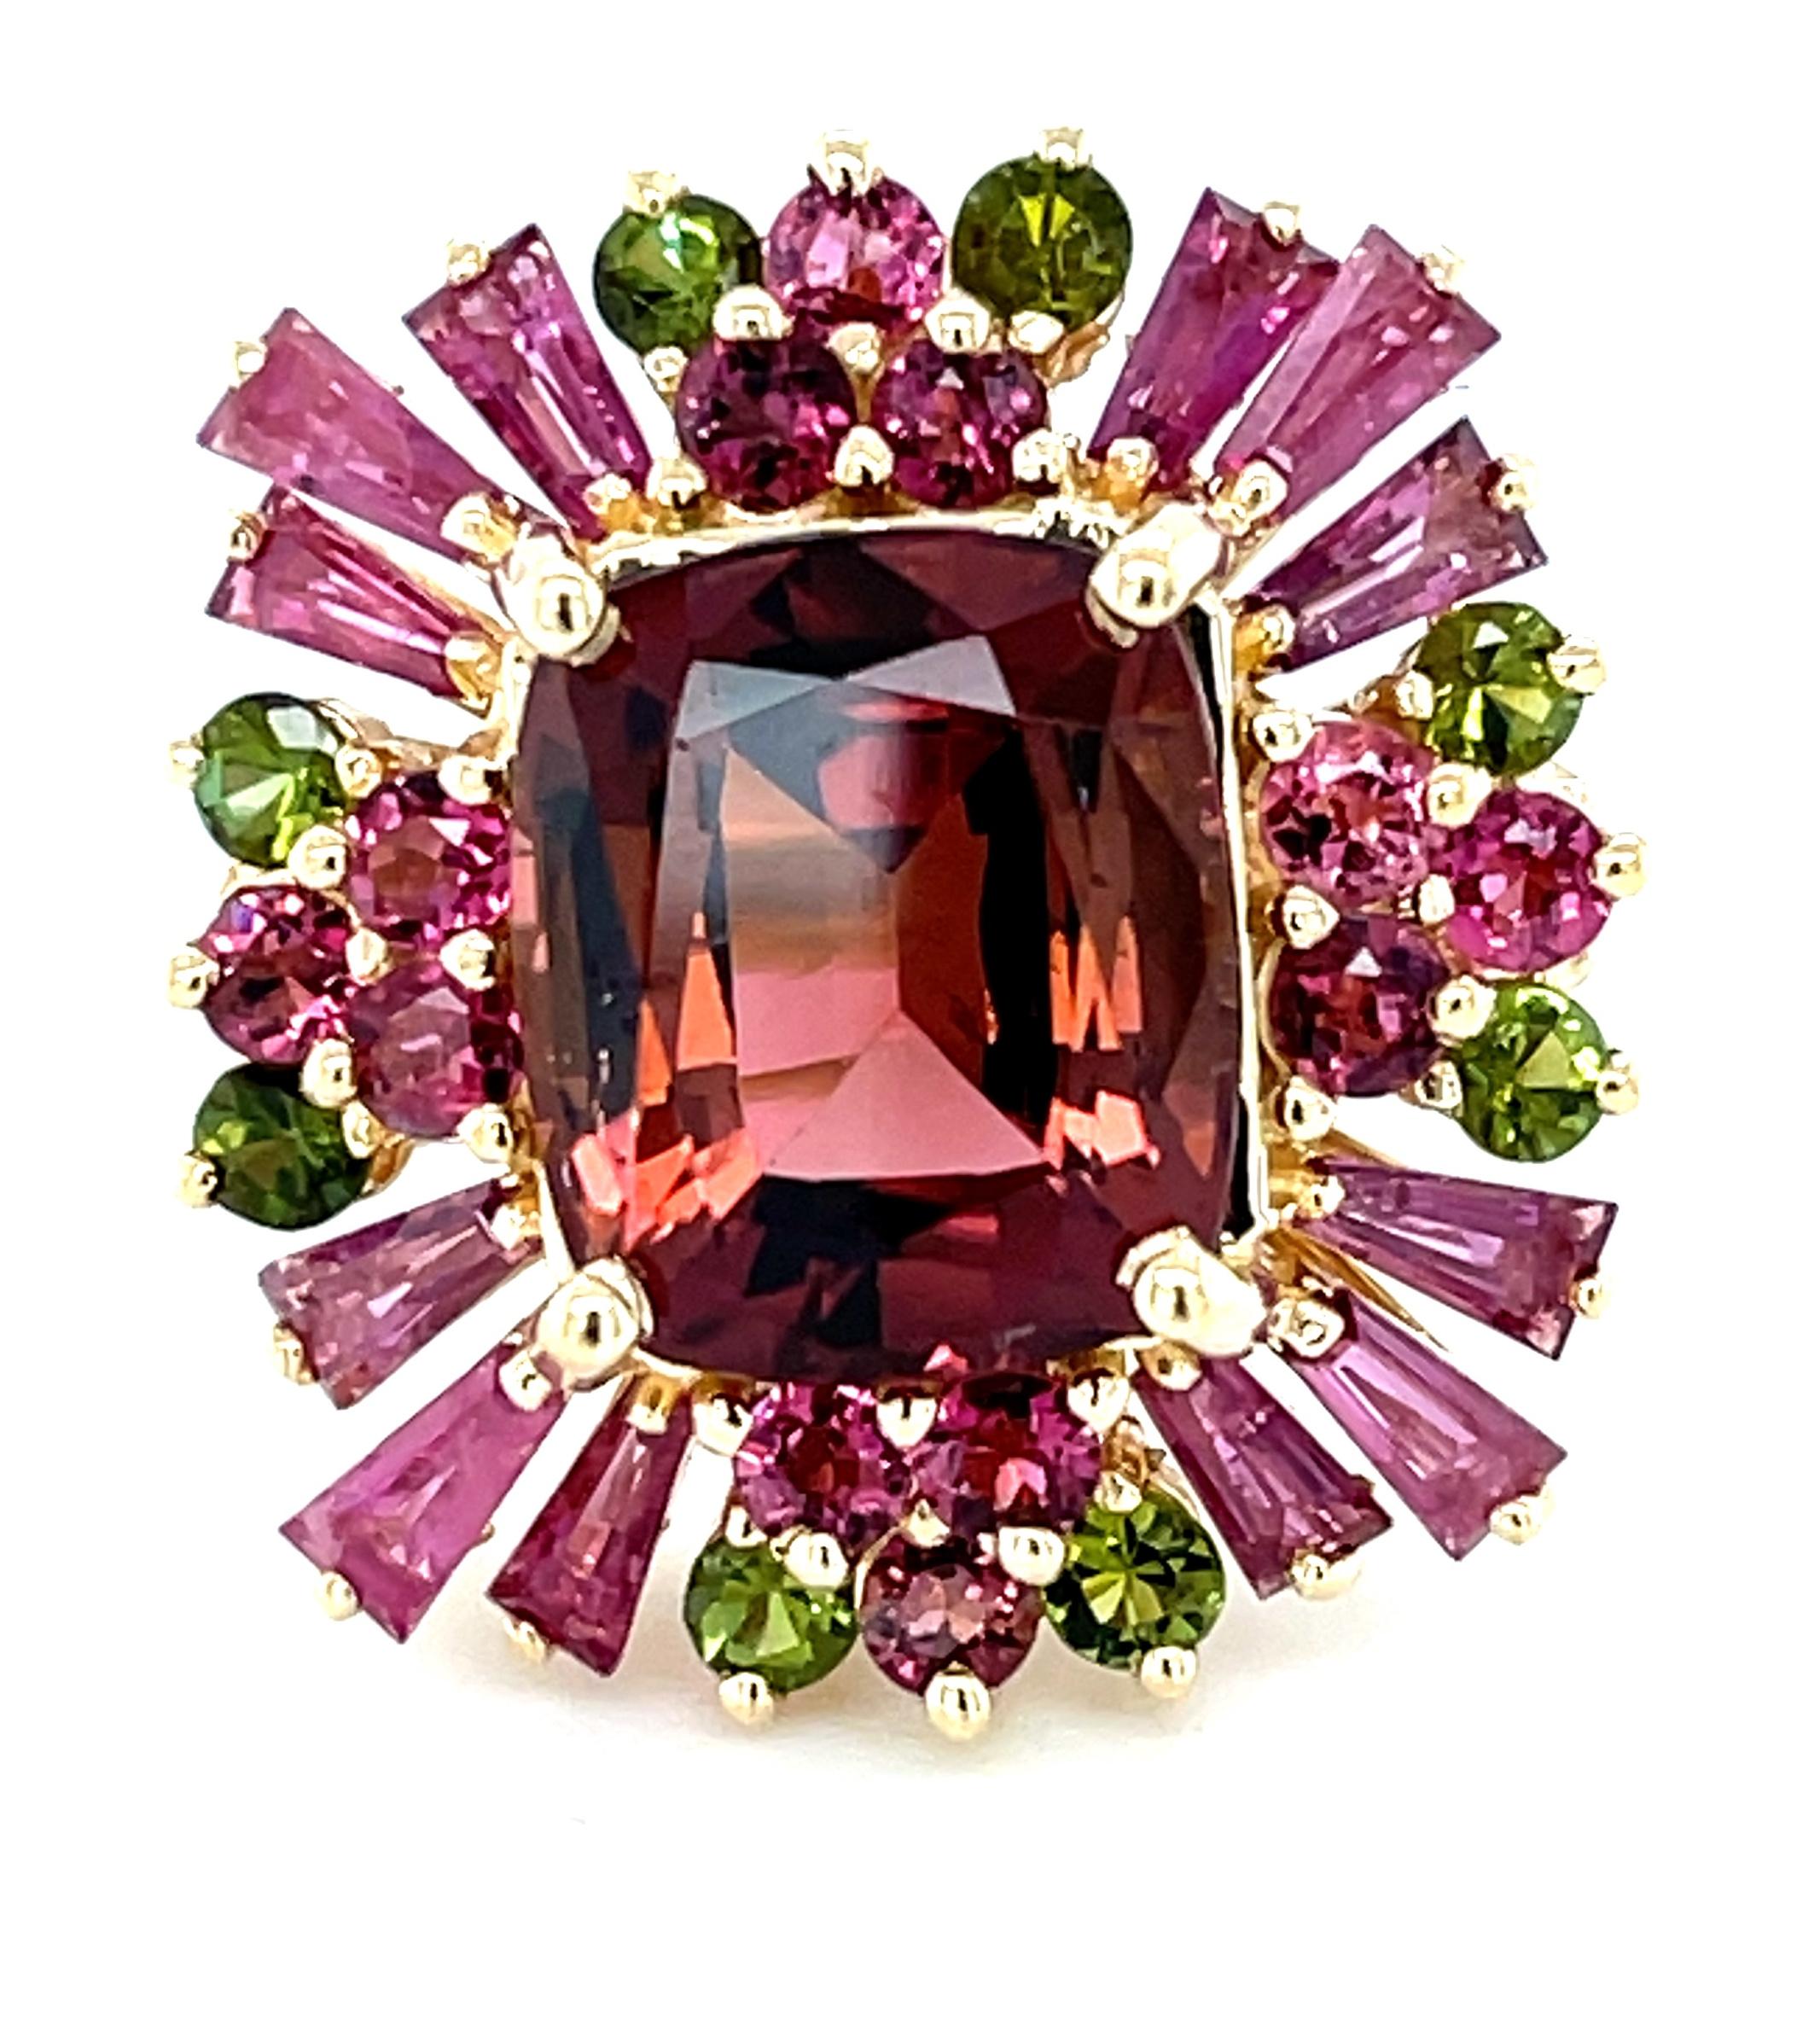 This beautiful colorful gemstone cocktail ring is so chic, fun, and eye-catching! A gorgeous wine-colored tourmaline weighing 7.57 carats sits center stage, accented with over 2 carats in ruby baguettes and sparkling pink and green tourmaline